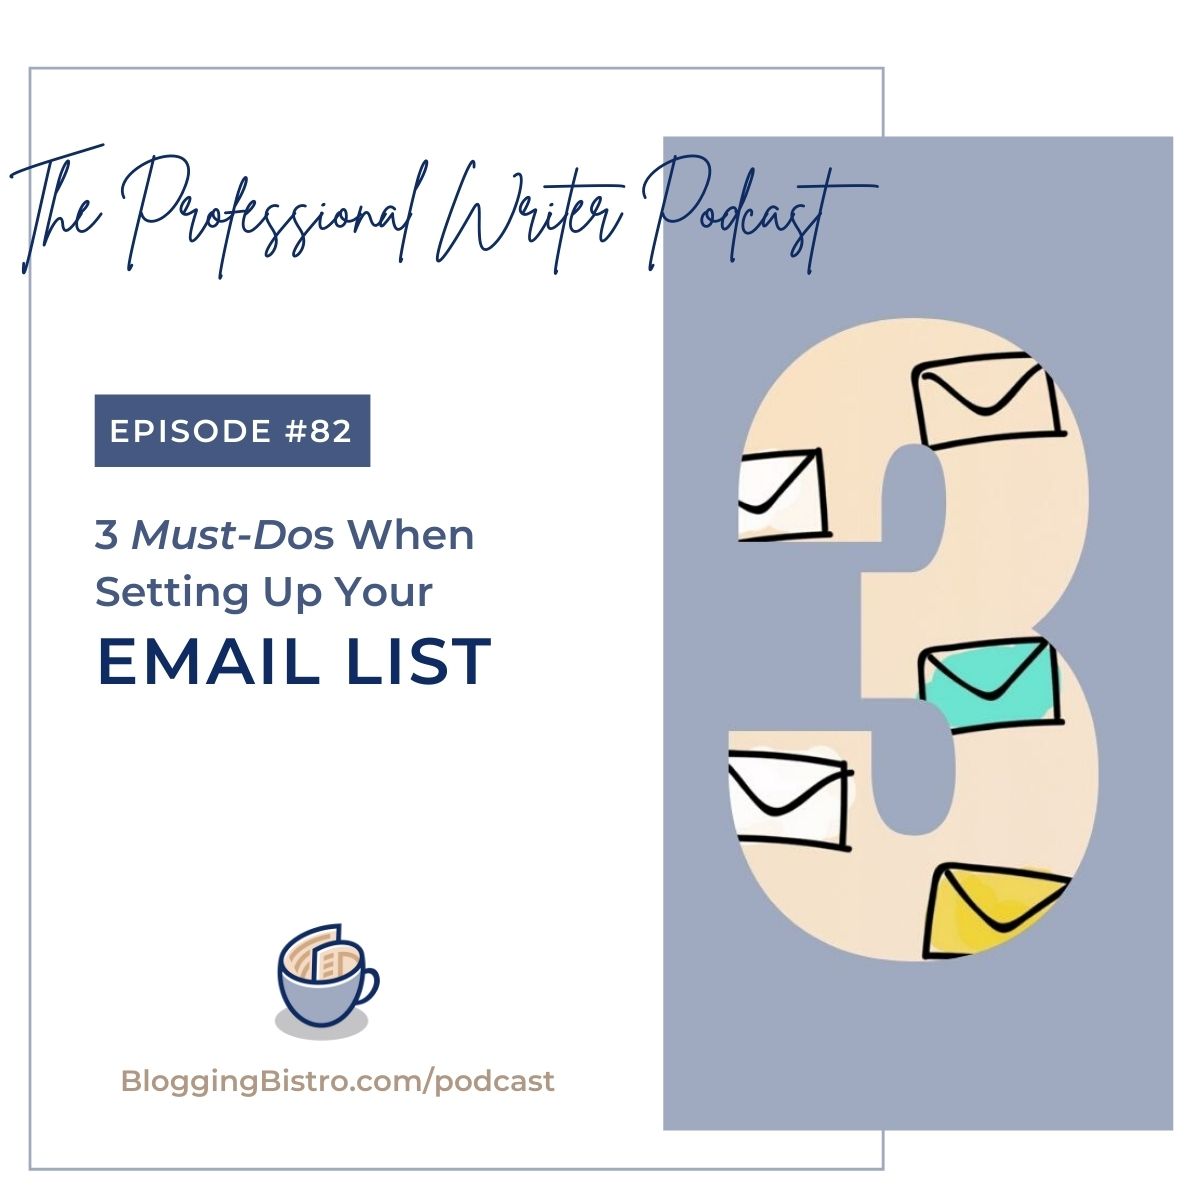 3 Must-Dos When Setting Up Your Email List